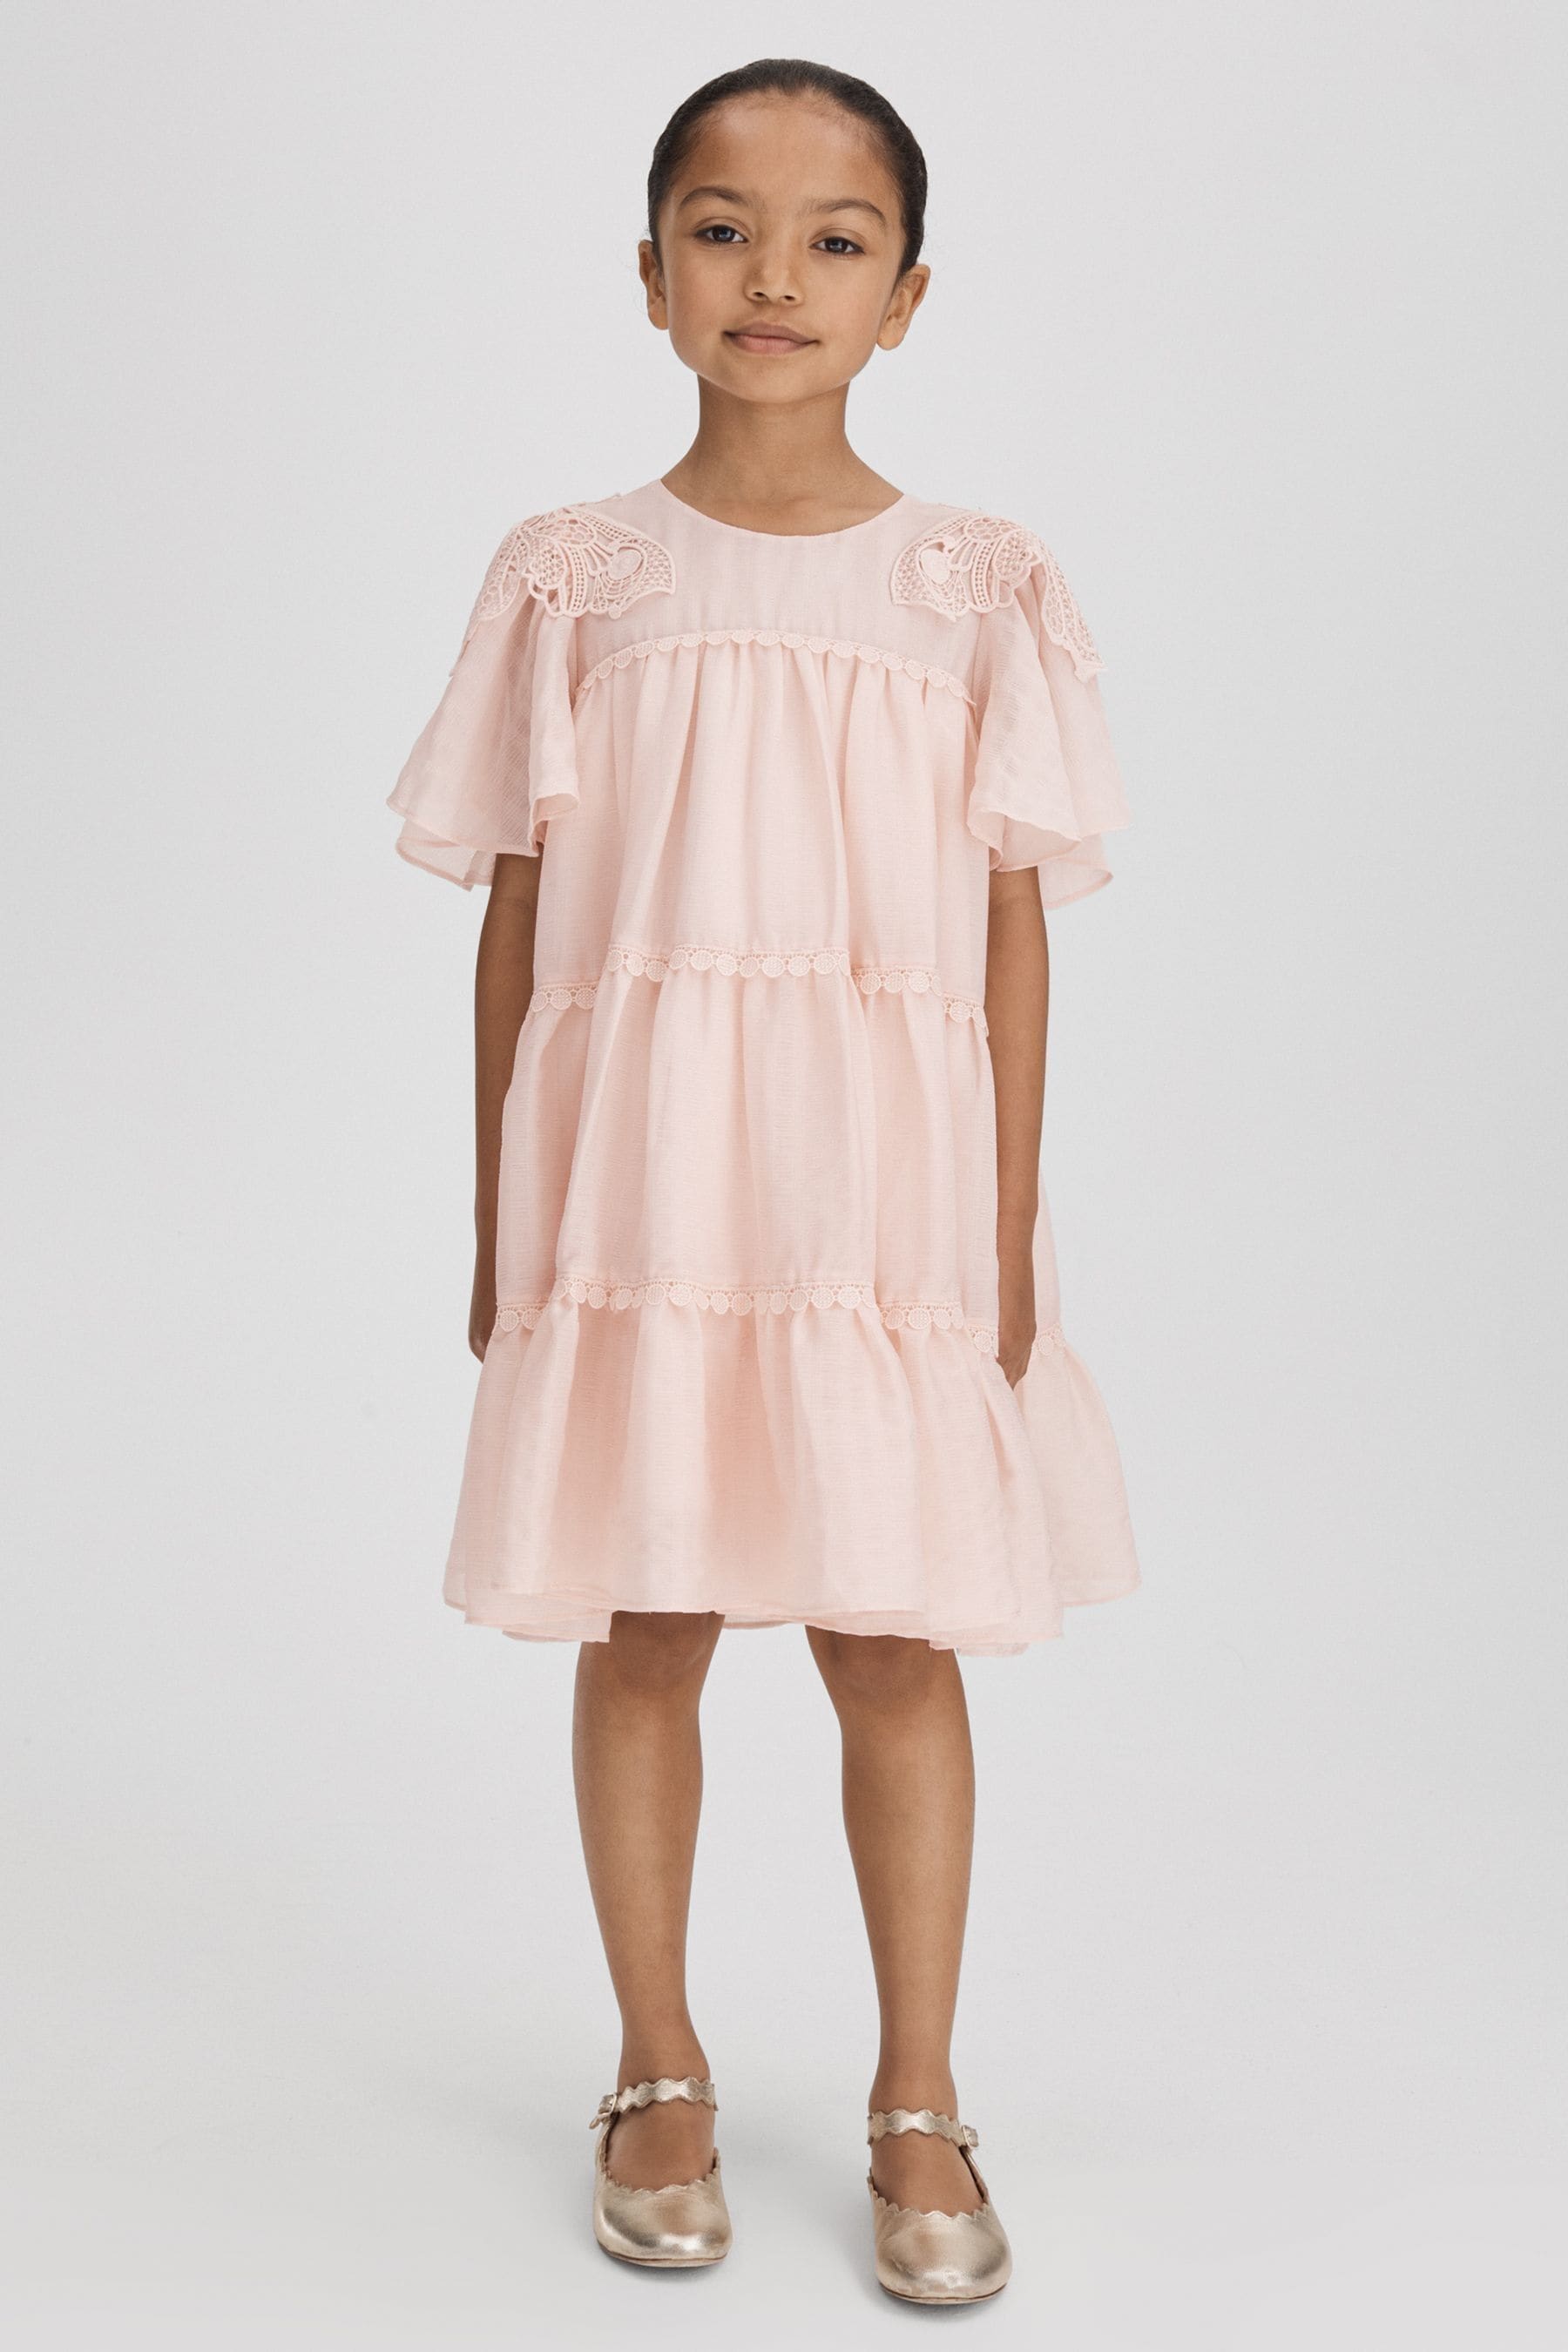 Reiss Leonie - Pink Teen Tiered Embroidered Dress, 13 - 14 Years